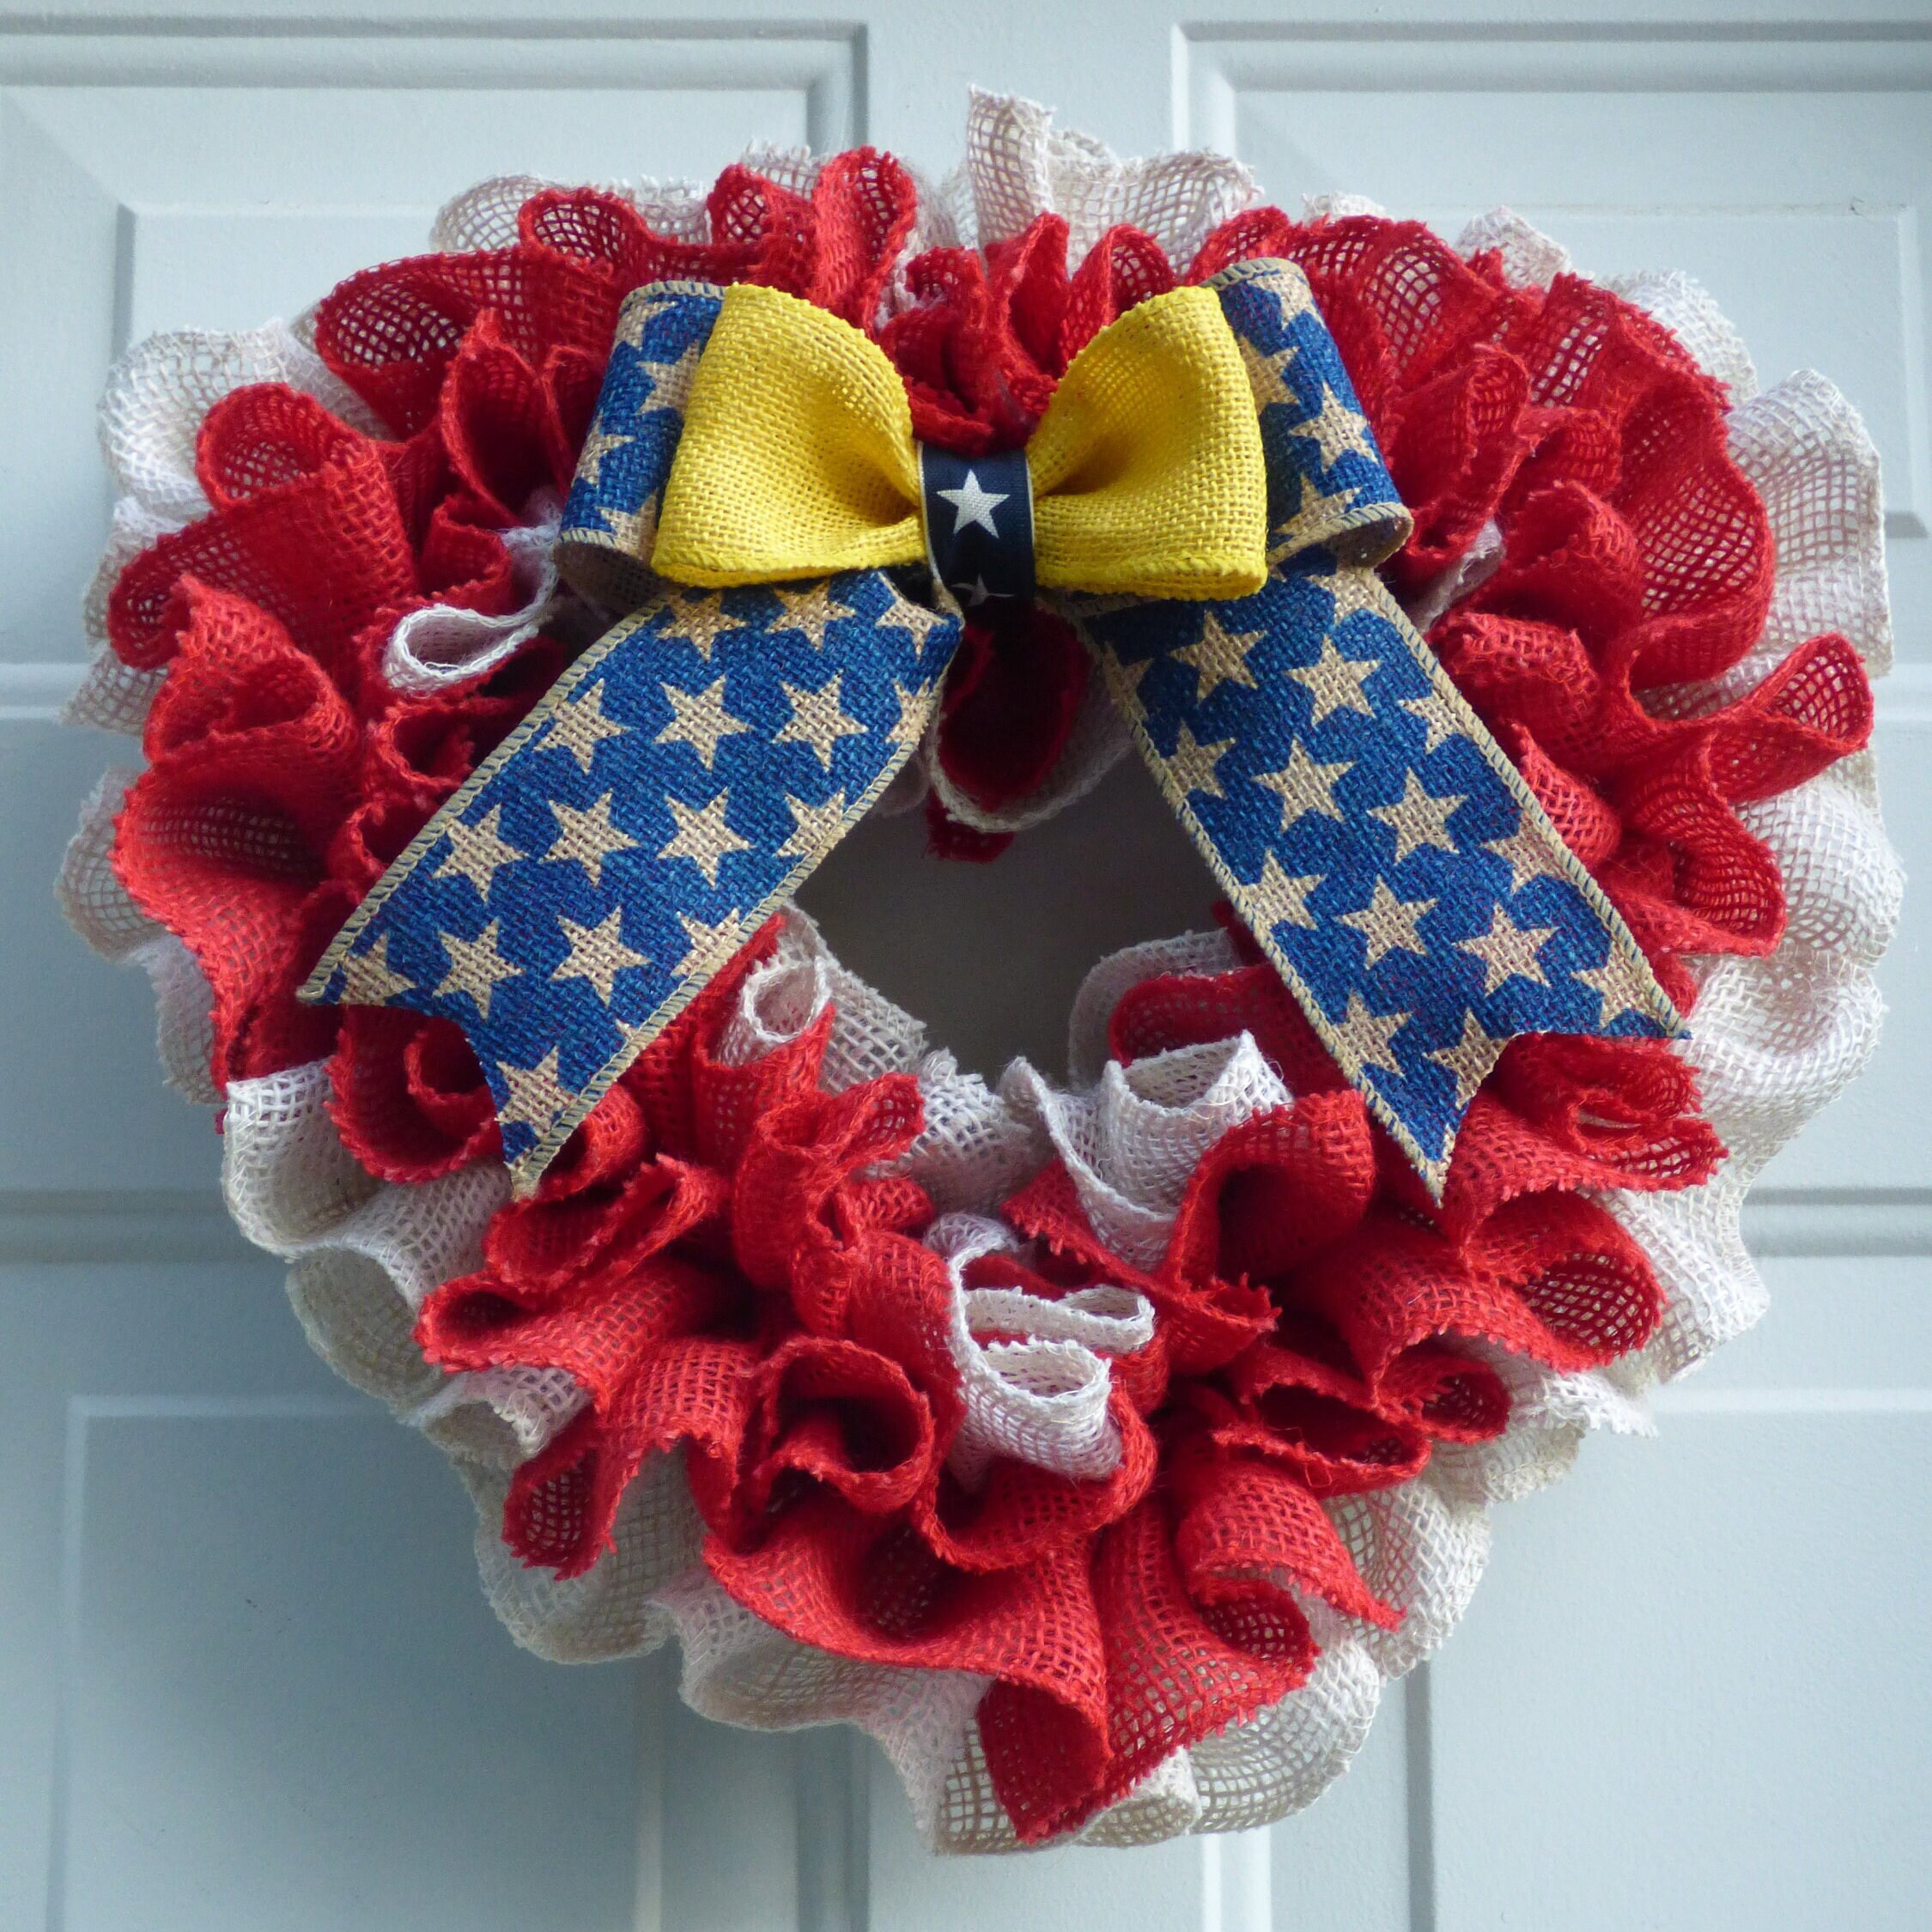 Large Red Ribbon Pull Bows - 9 Wide, Set of 6, Christmas, Gift Bows,  Wreath, Presents, Veteran's Day, Birthday, 4th of July